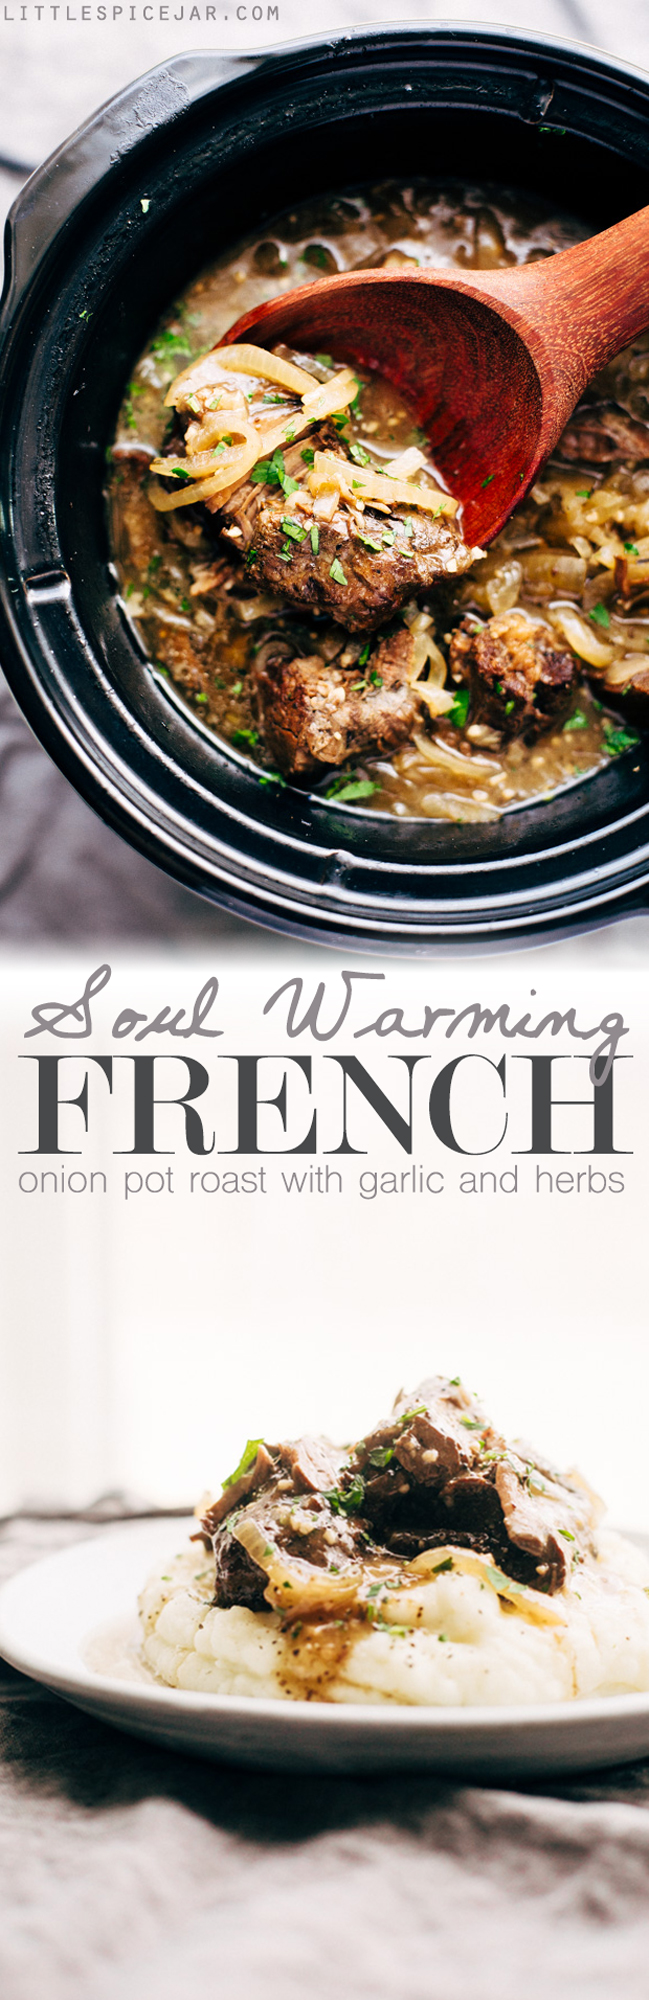 Soul Warming French Onion Pot Roast - A simple pot roast that combines french onion soup with pot roast! Make it in the slow cooker on in the oven! #potroast #beefroast #frenchonionsoup #slowcooker | Littlespicejar.com